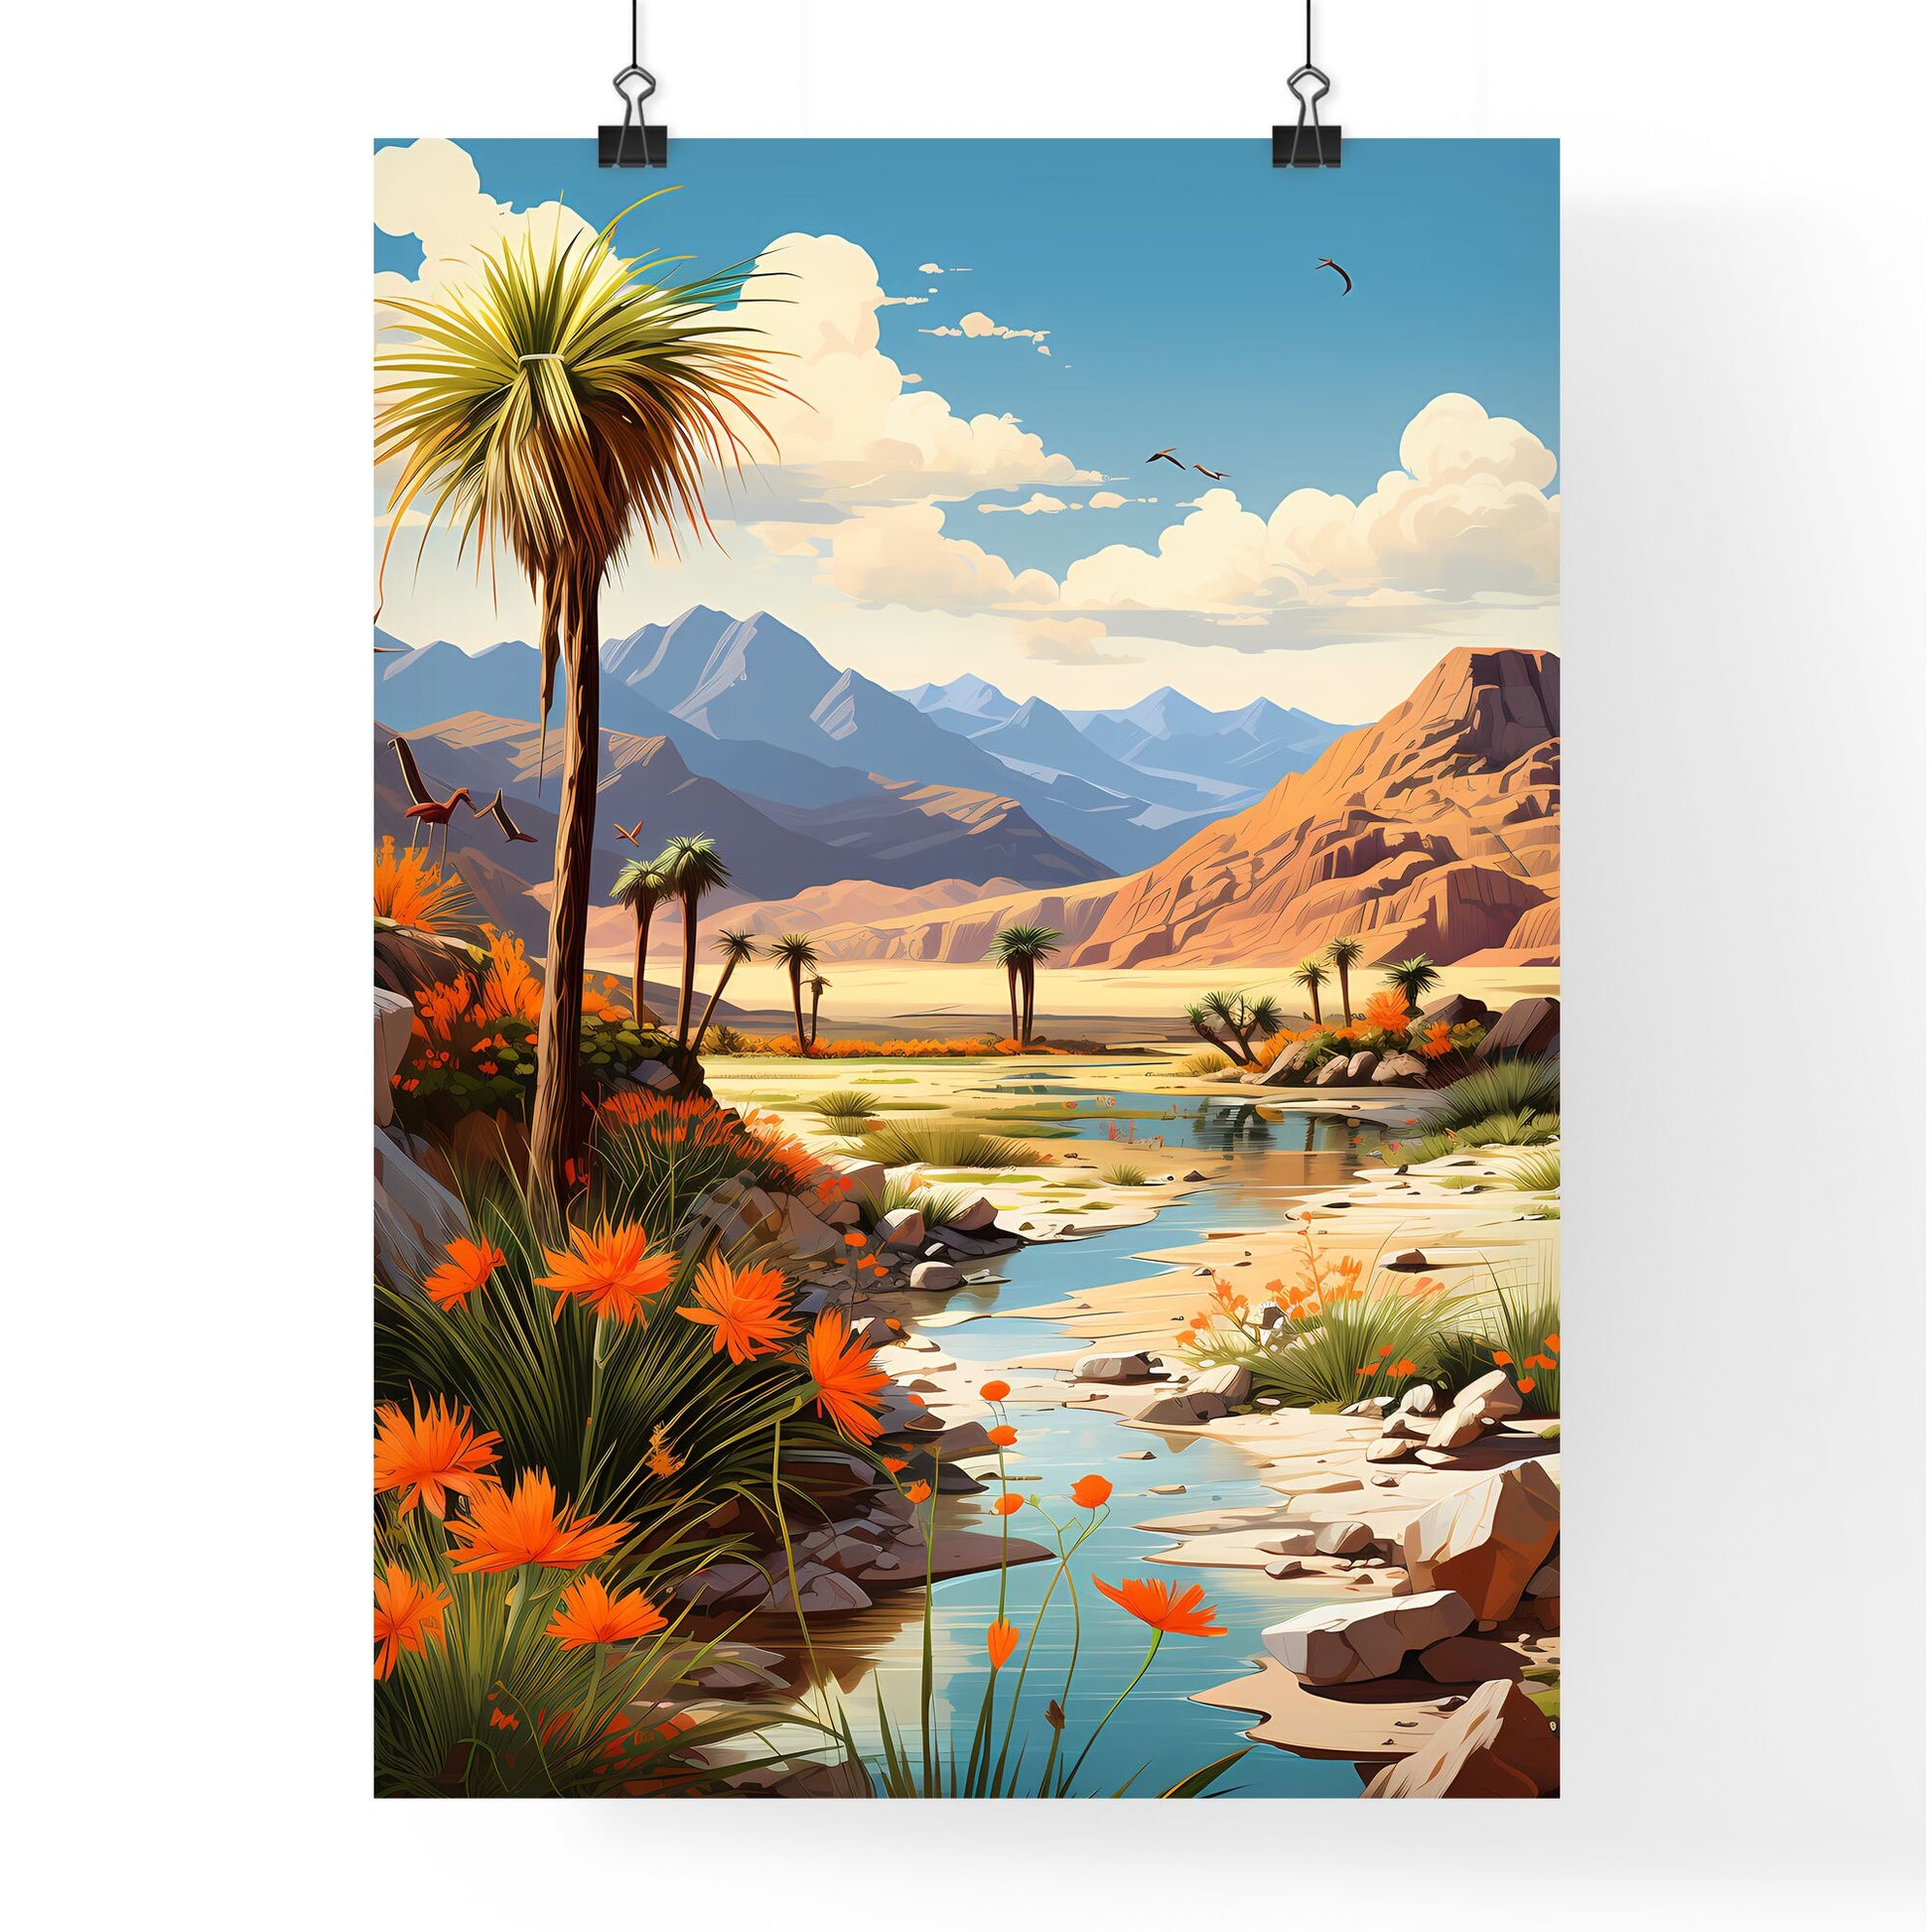 A Poster of Death Valley National park - A Landscape With Mountains And A River Default Title